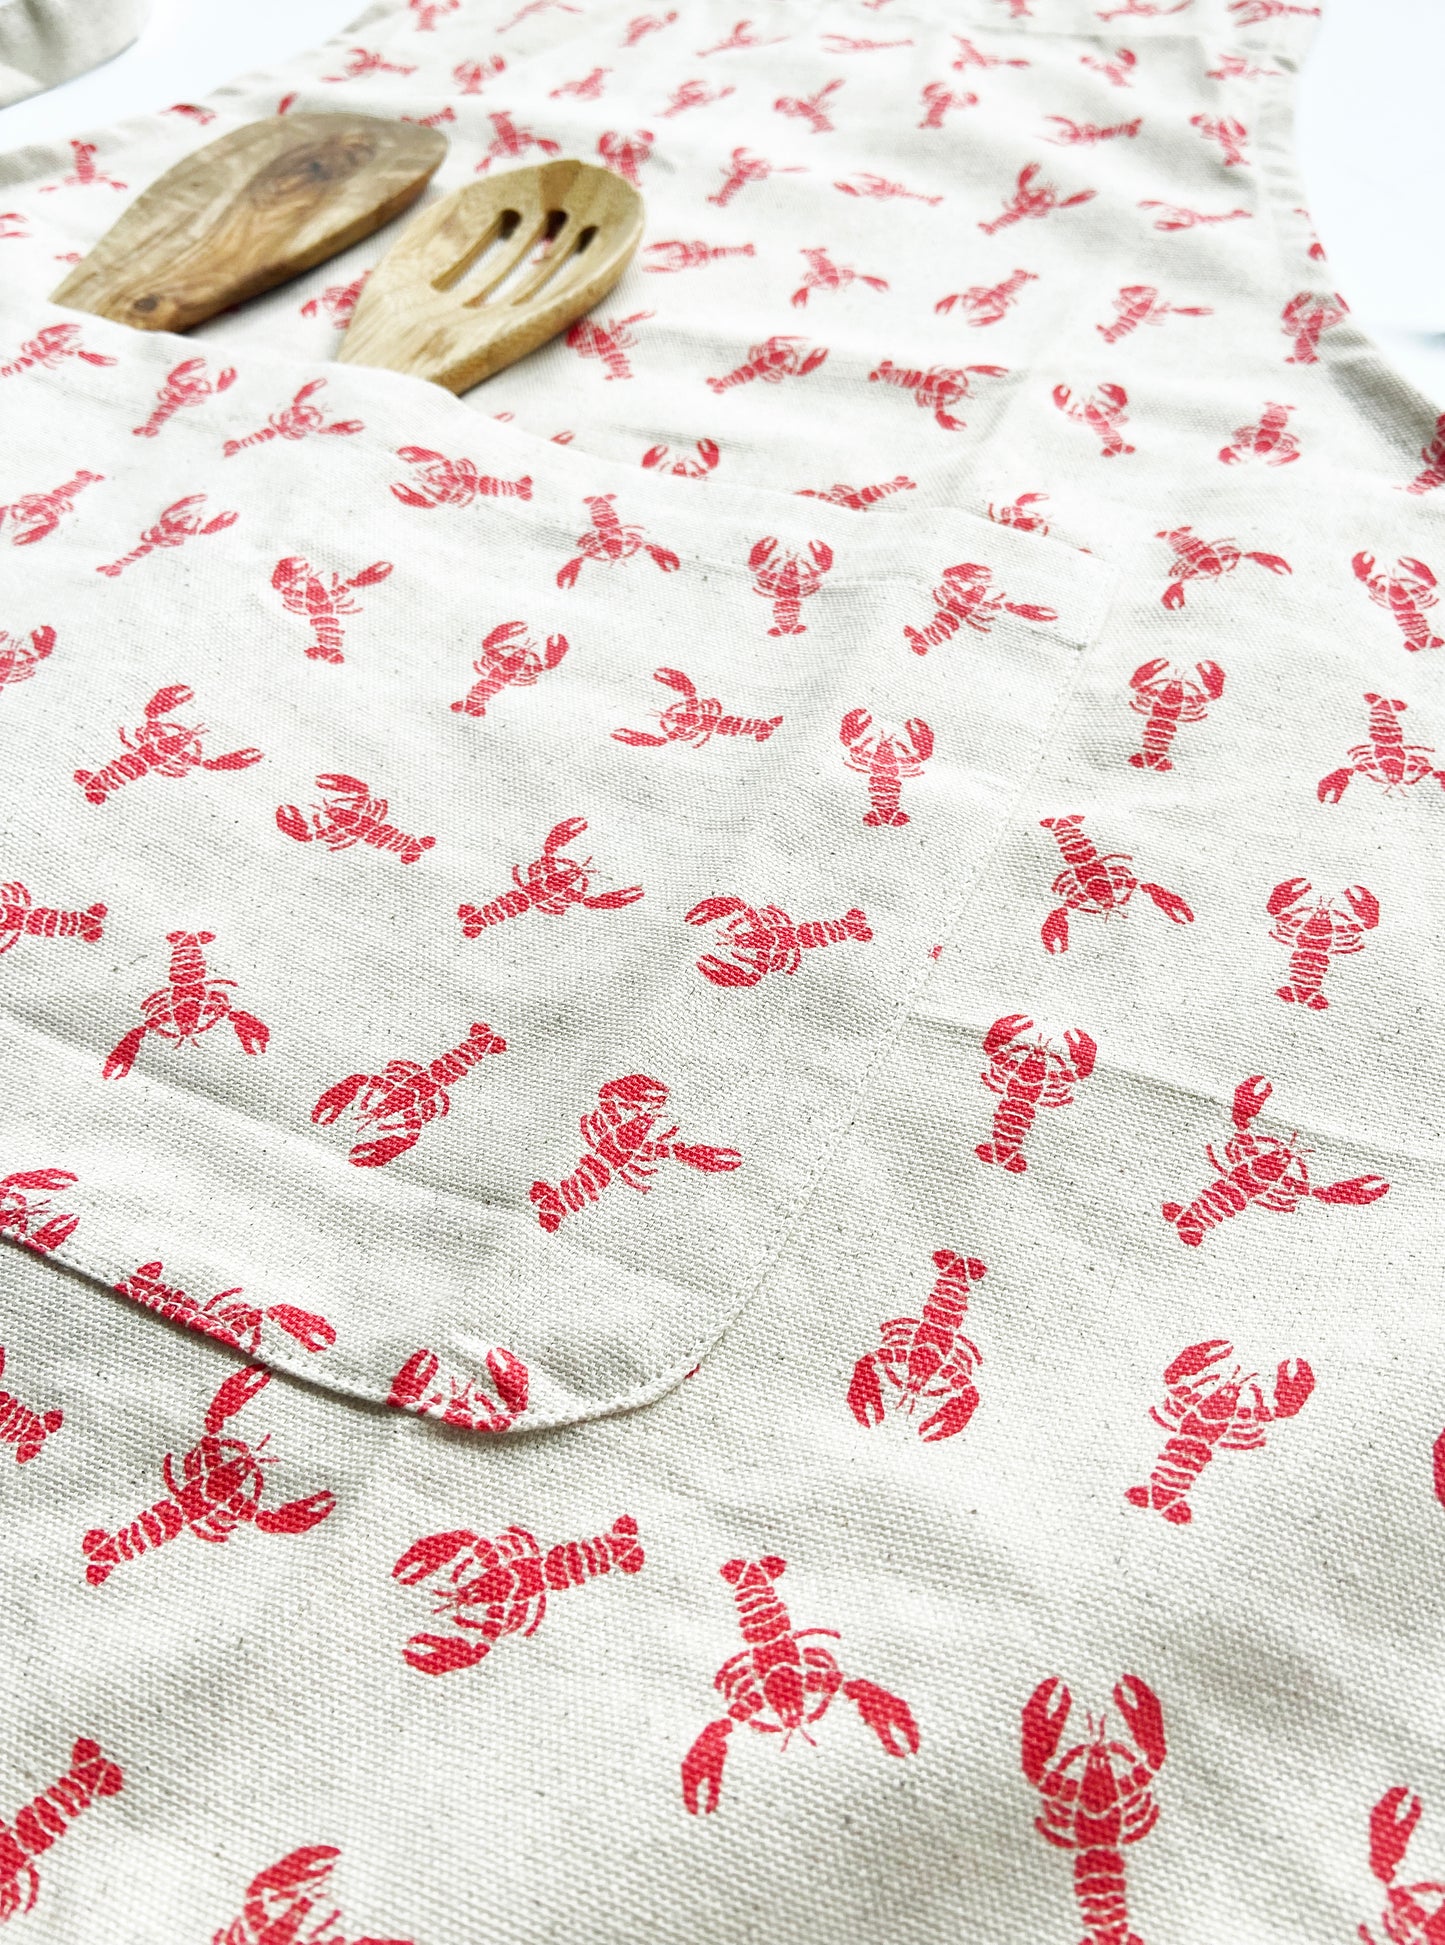 Unisex Apron and Oven Mitt Set - Lobster Pattern - Natural Cotton Canvas